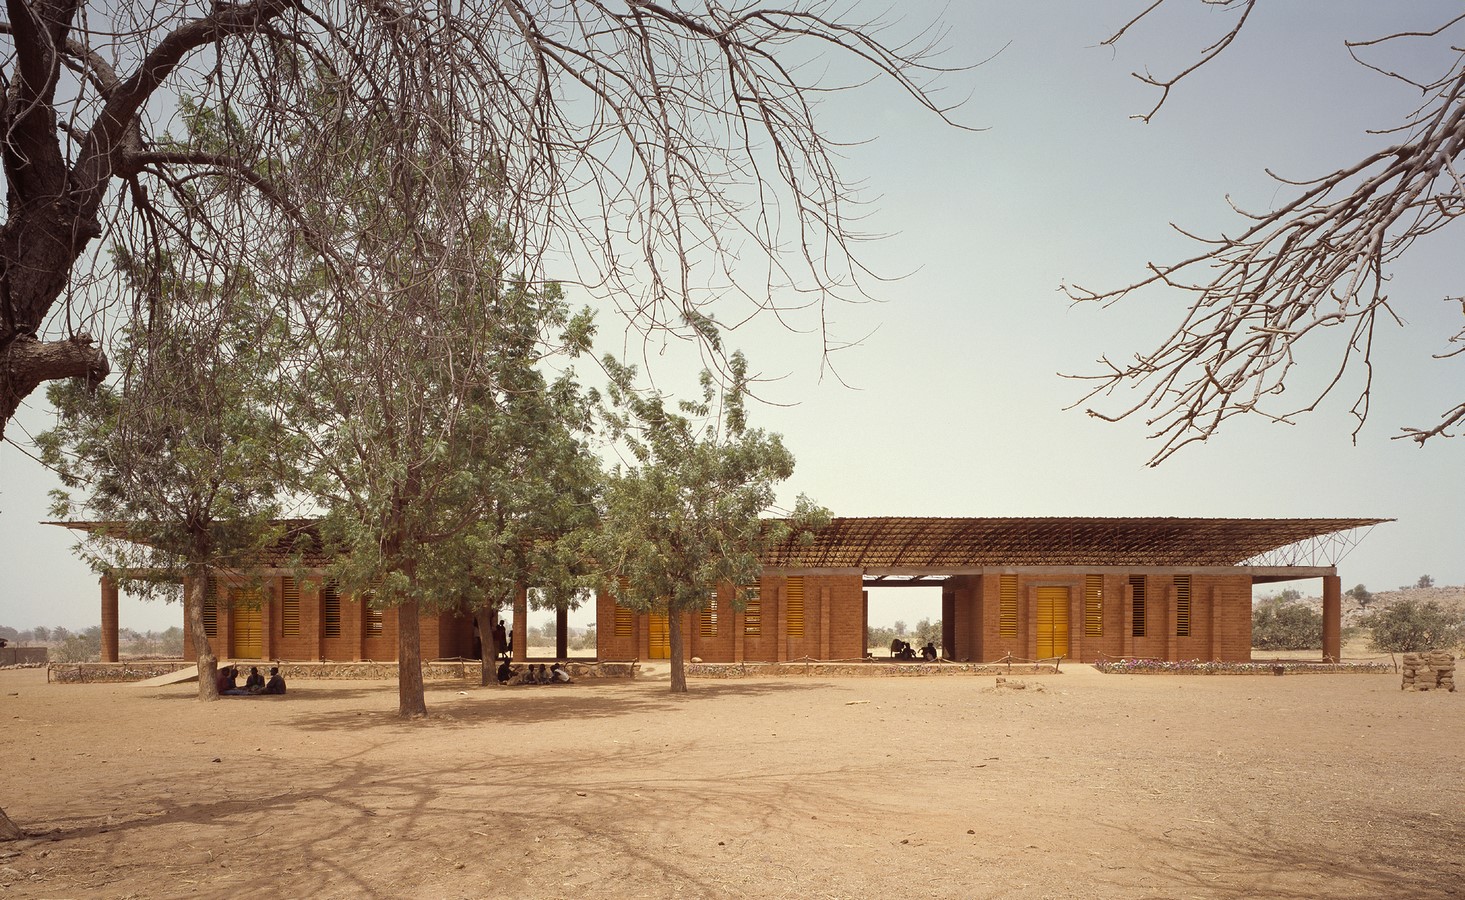 Pritzker Architecture Prize awarded to Diébédo Francis Kéré, First African to receive the highest honor in Architecture. - Sheet3